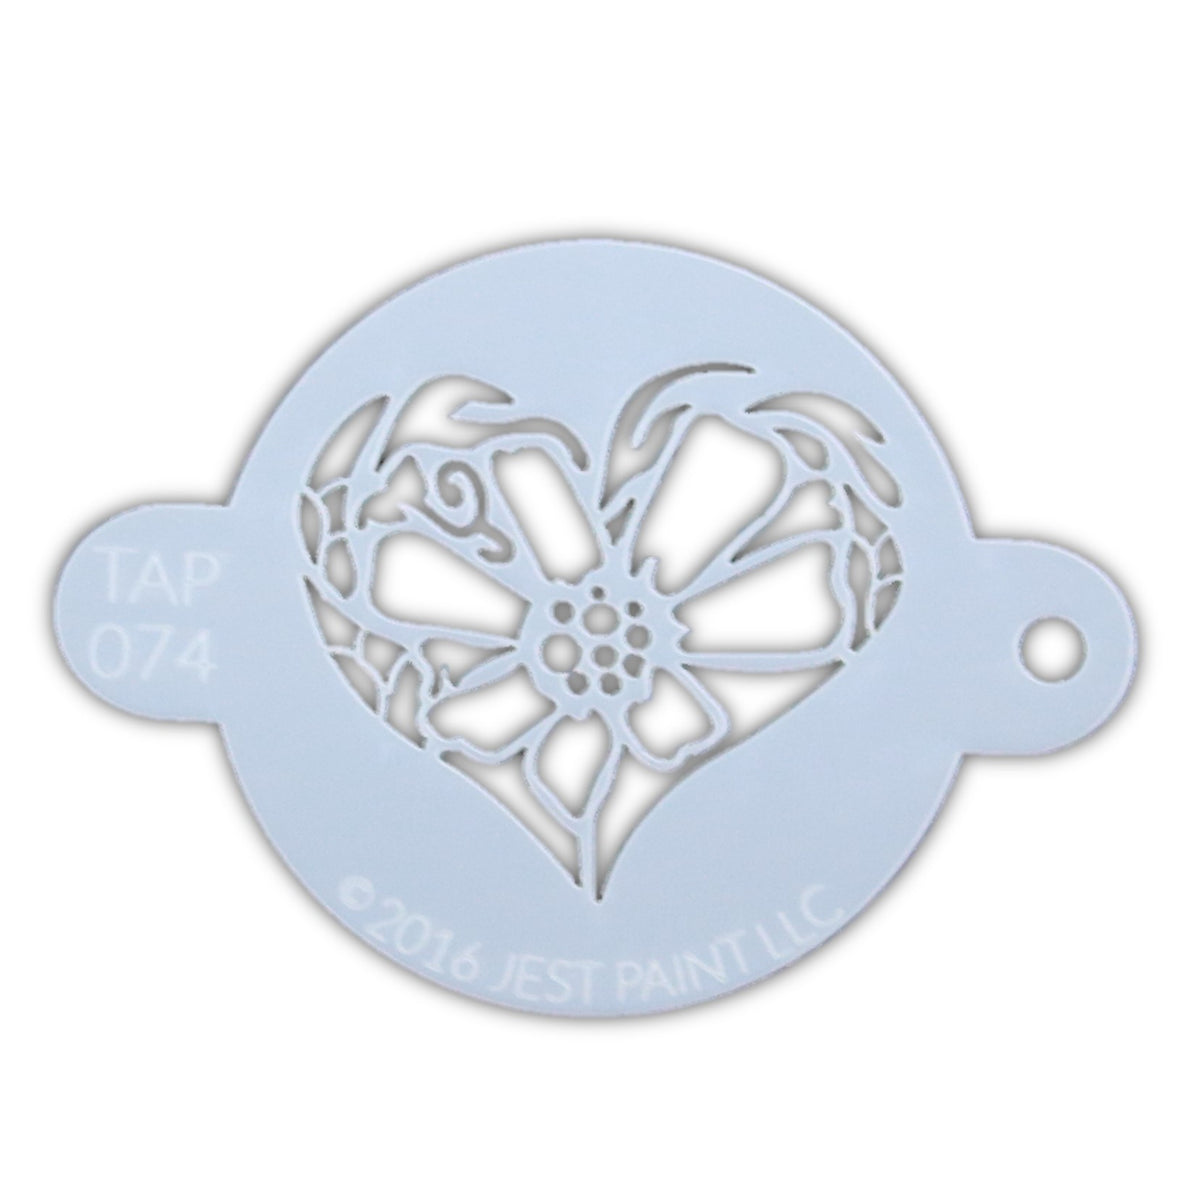 Fancy Heart Stencil, 3 x 3 inch (S) - Valentine Floral Heart Design  Stencils Template for Painting